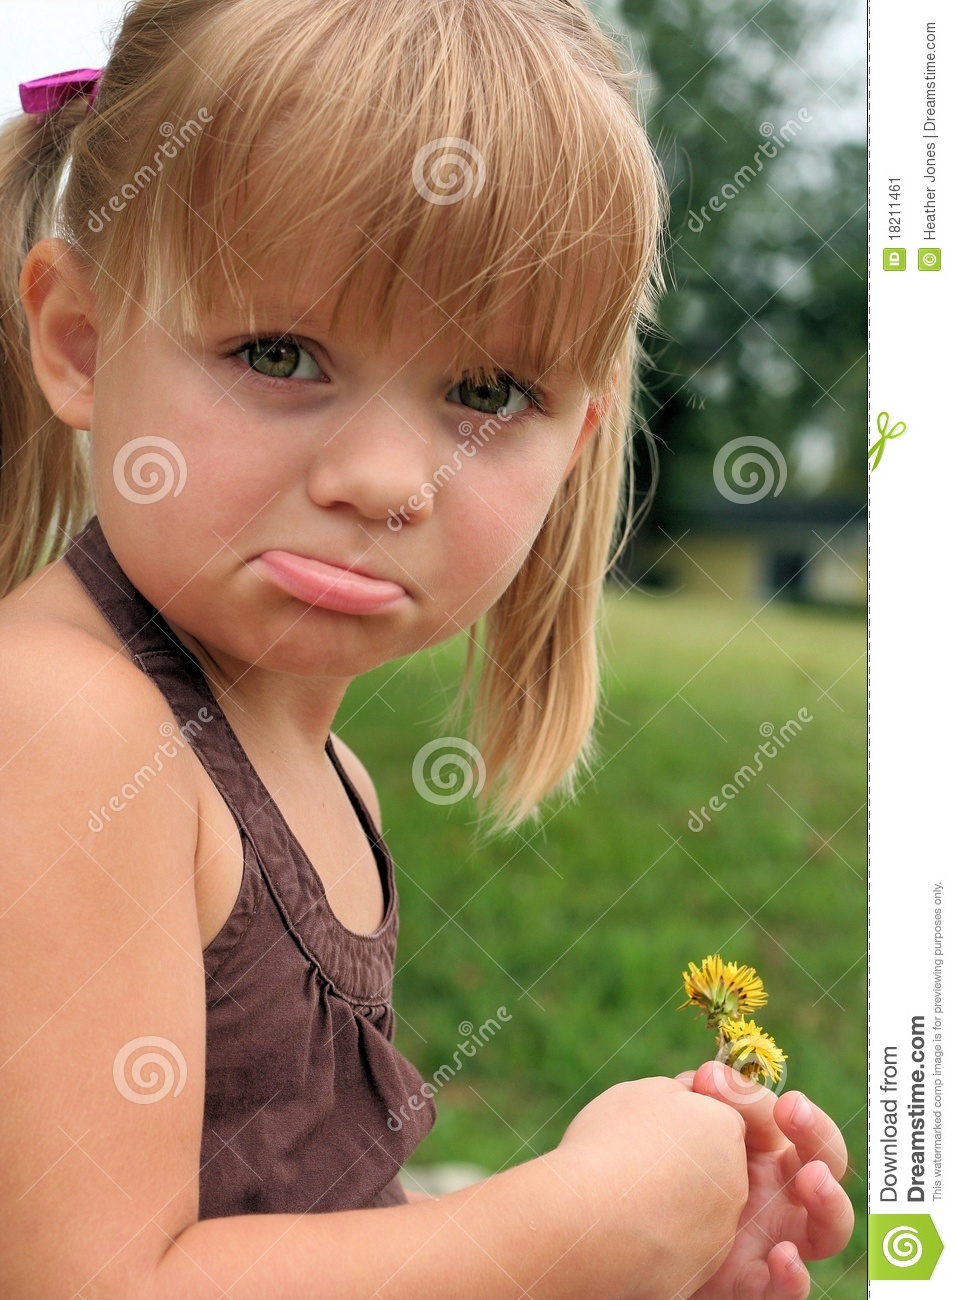 Pouty Girl Stock Image   Image  18211461